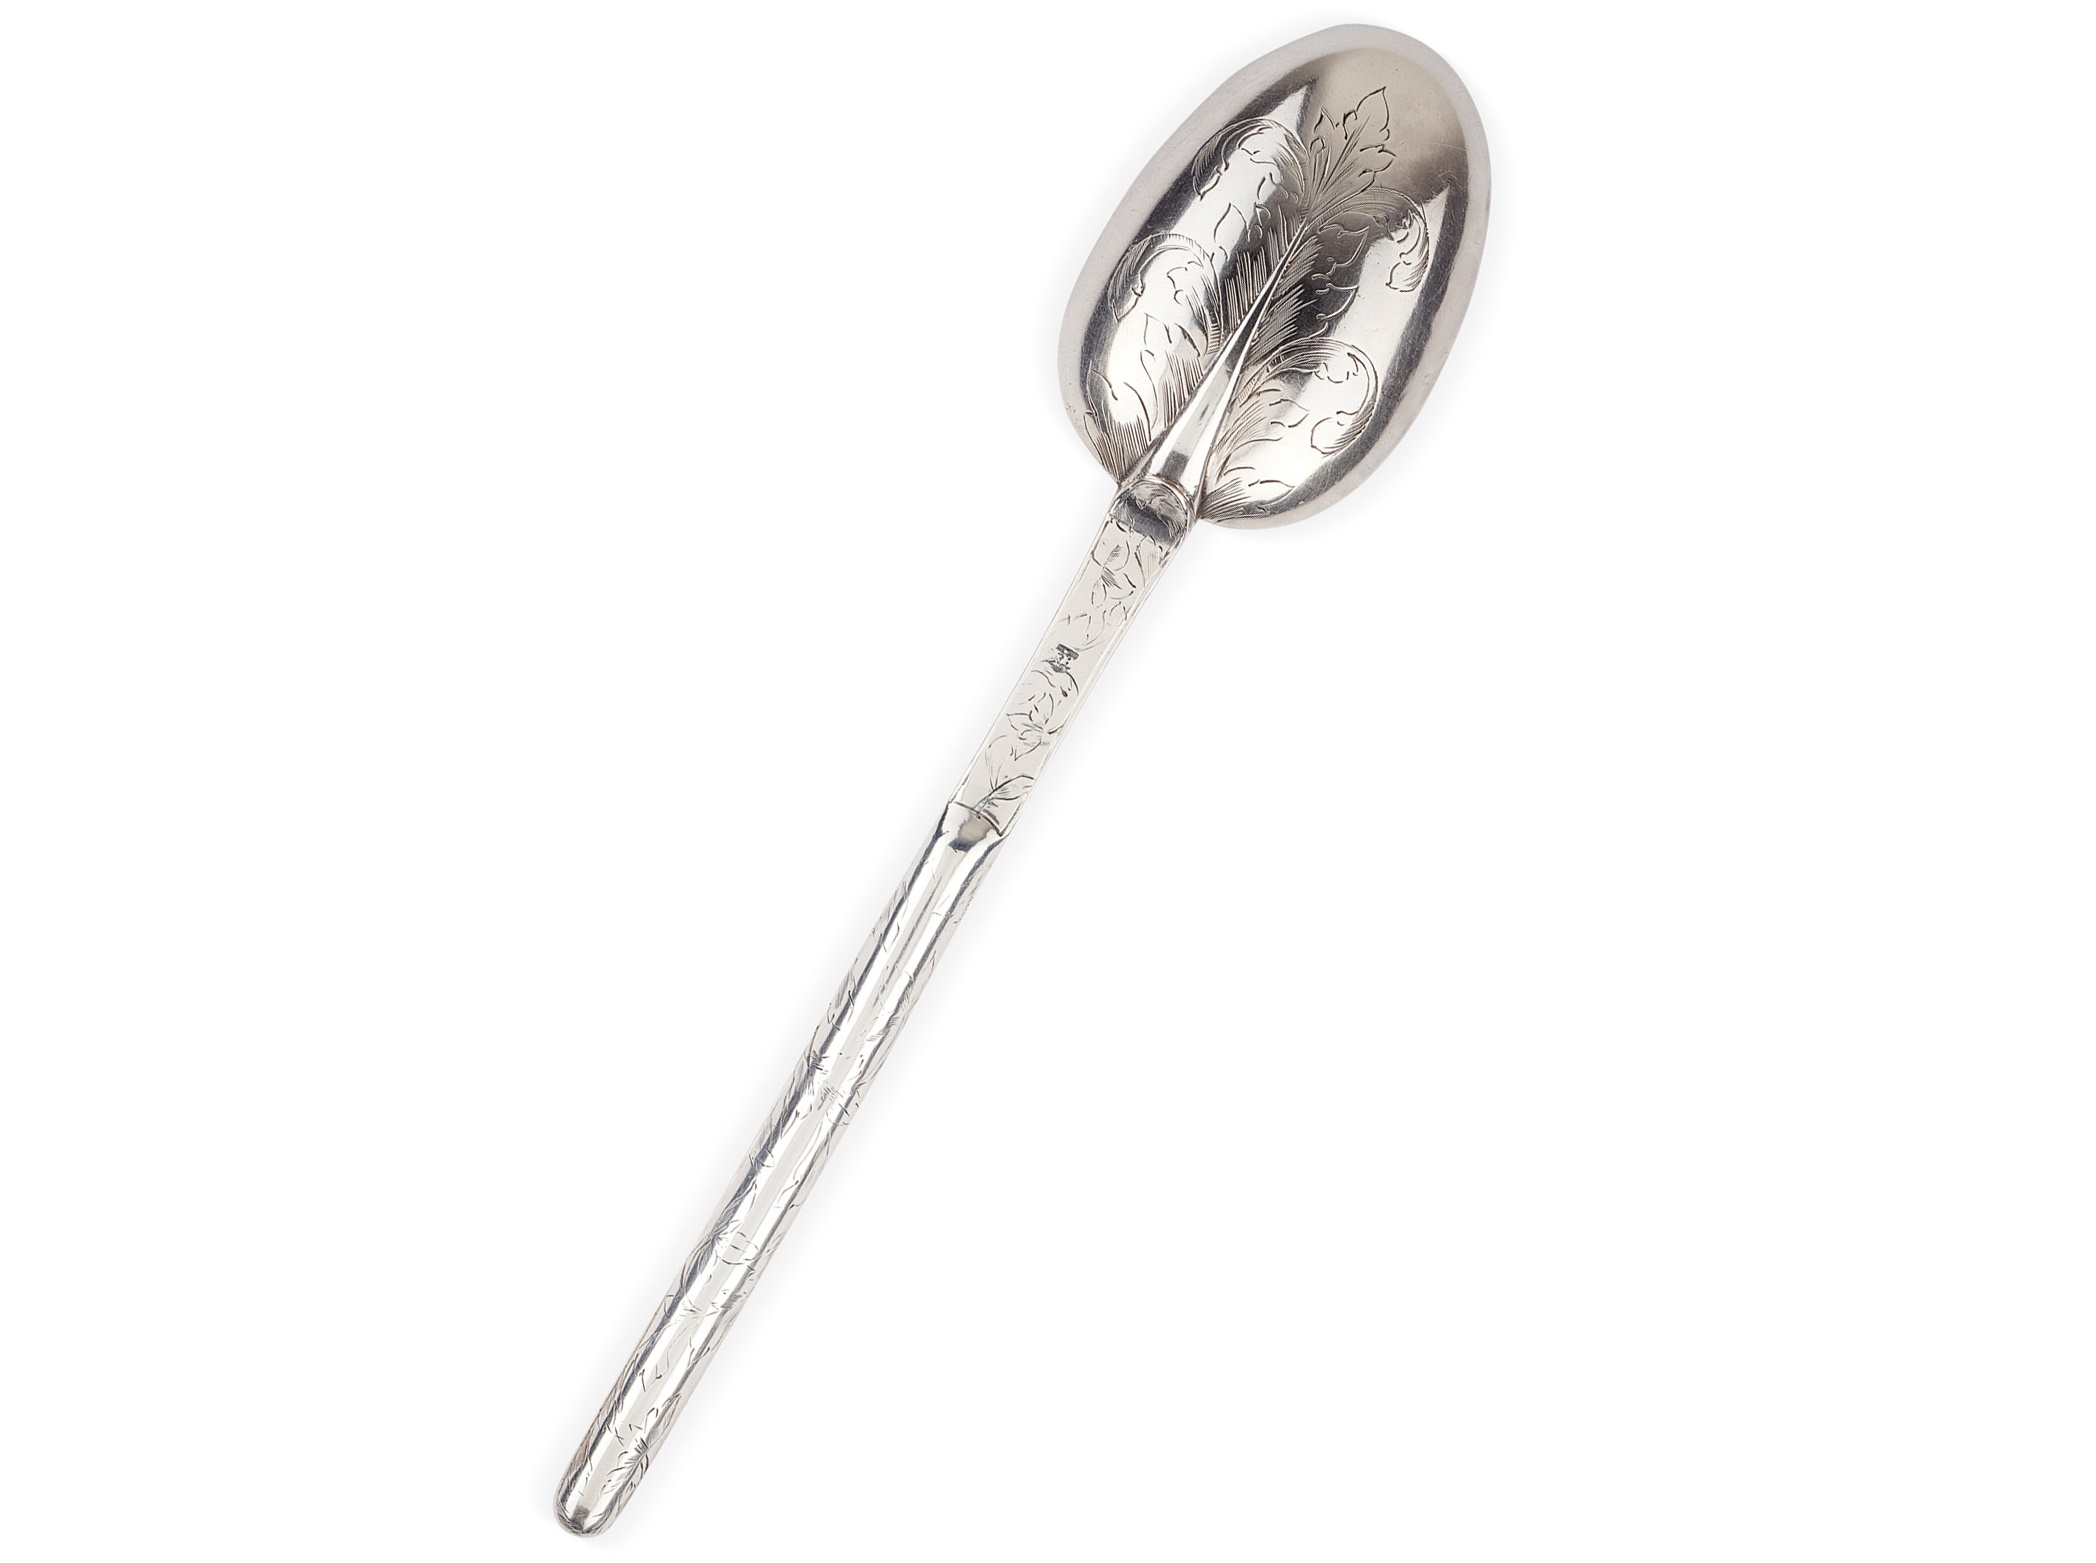 A rare William and Mary combination marrow spoon scoop